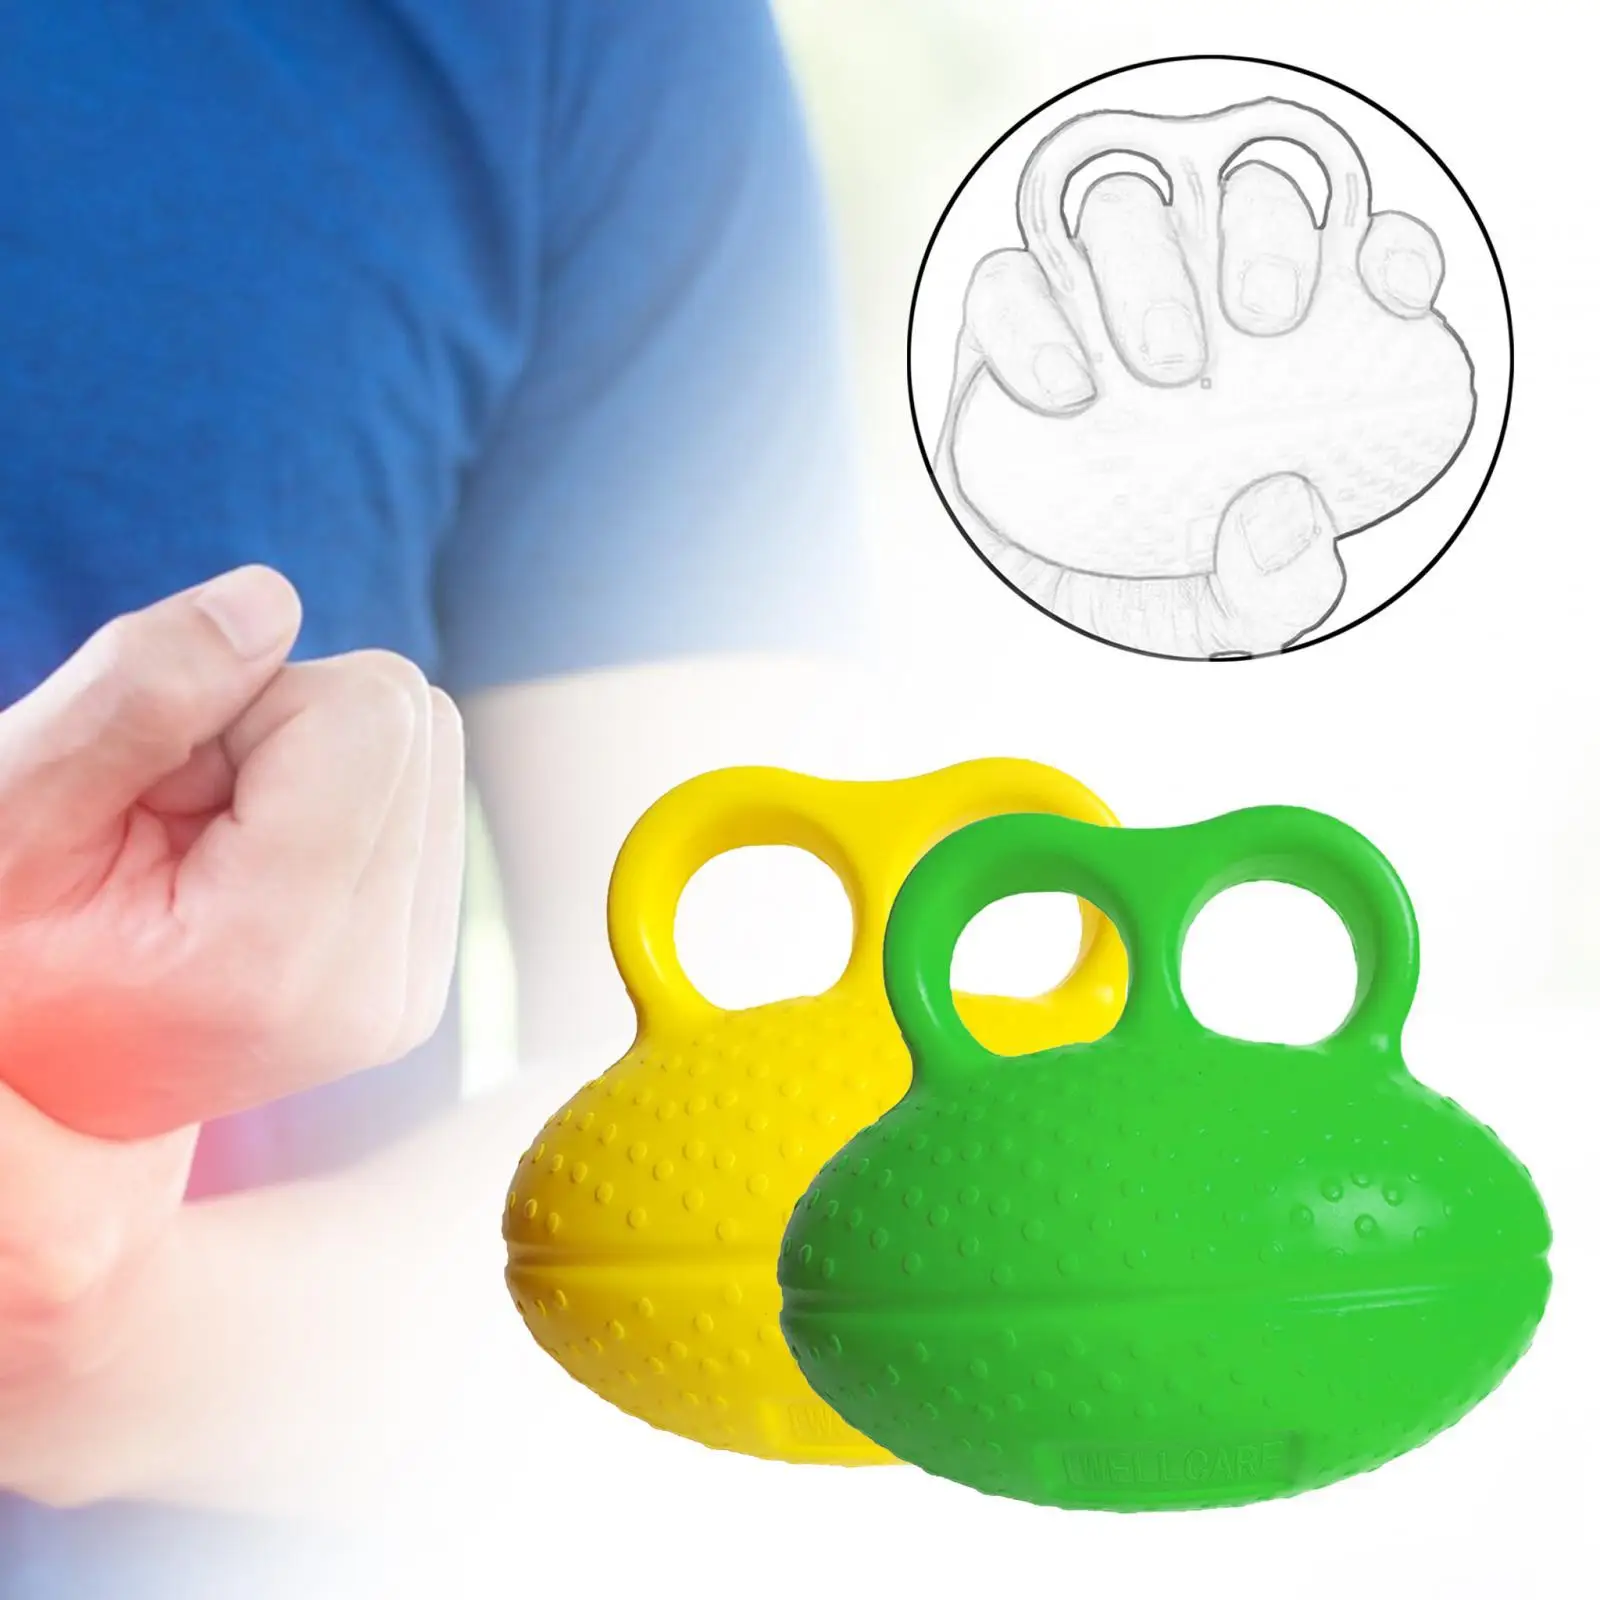 Finger Exerciser PU Build Hand, Finger and Wrist Strength Grip Exercise Ball for Adults Grip Strength Training Elderly Athletes